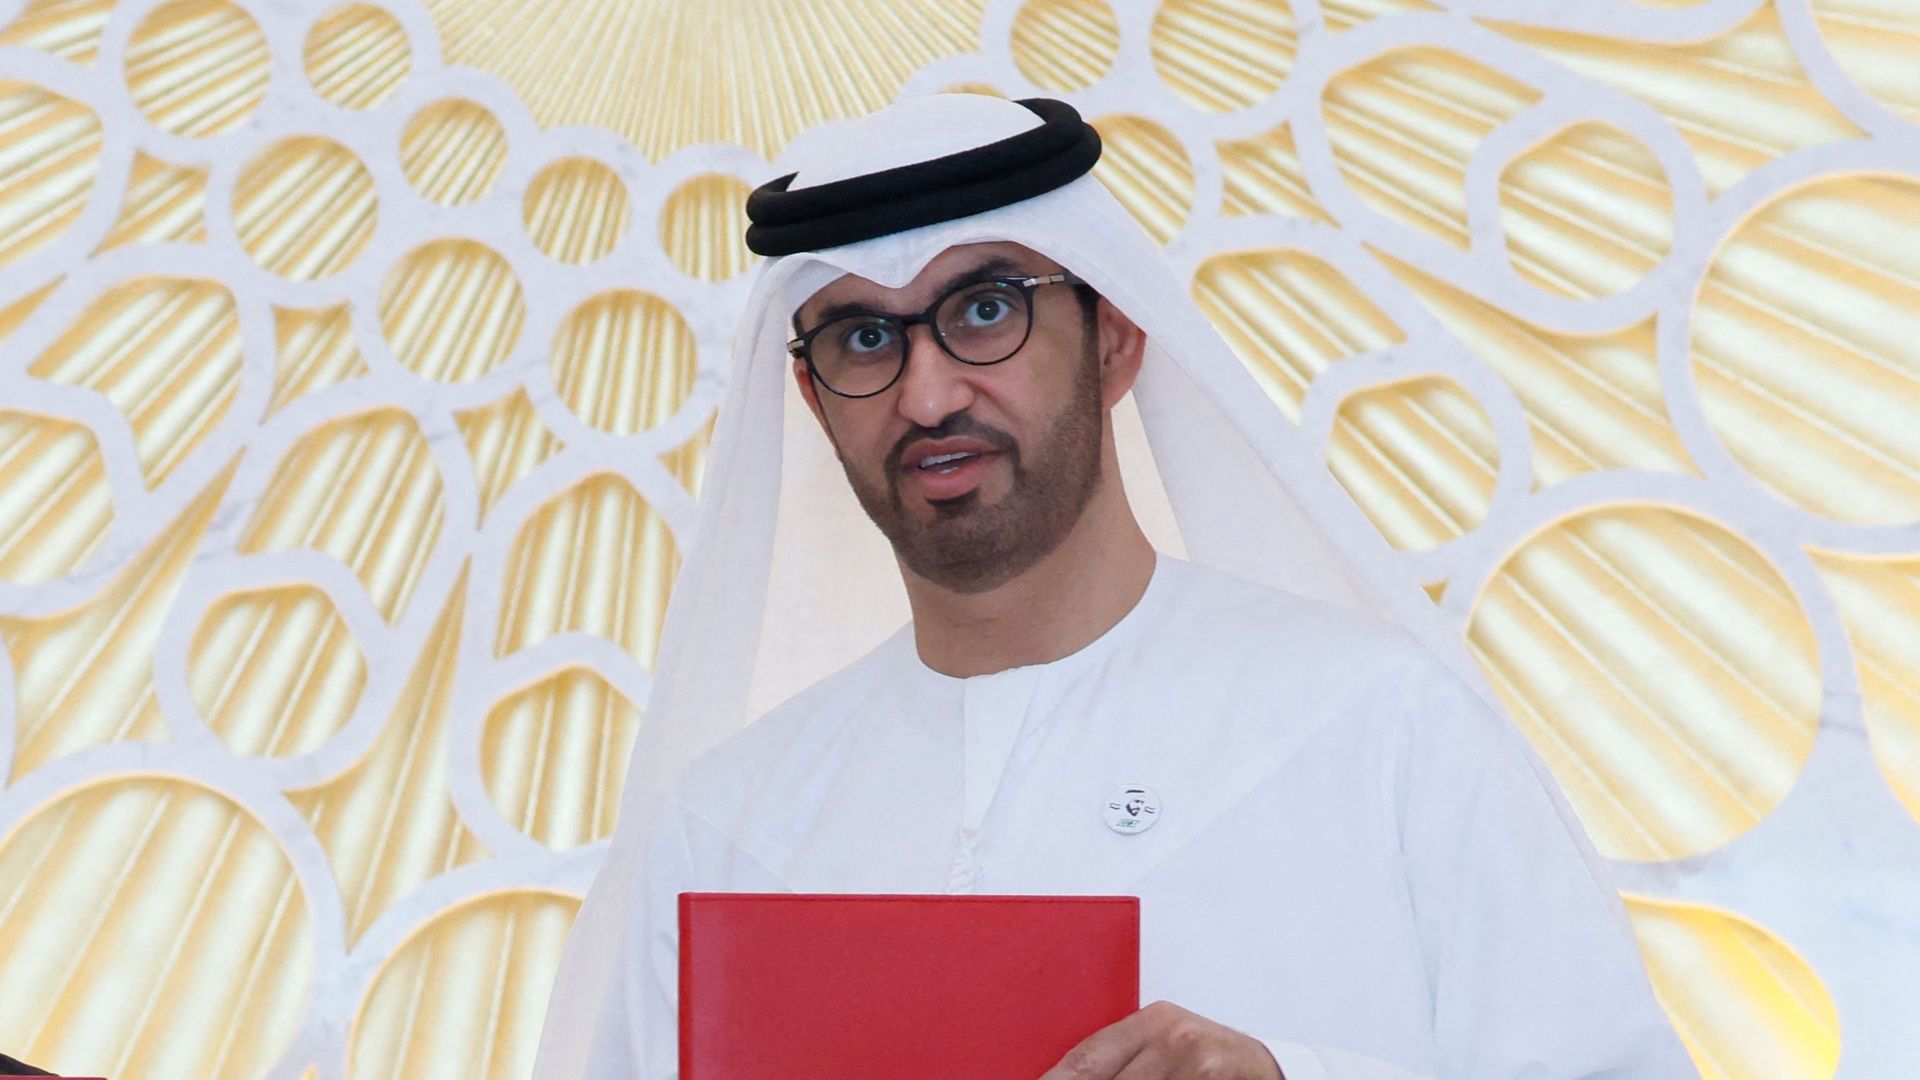 Emirati Minister of Industry and Advanced Technology Sultan Ahmed al-Jaber in Dubai on December 3, 2021.